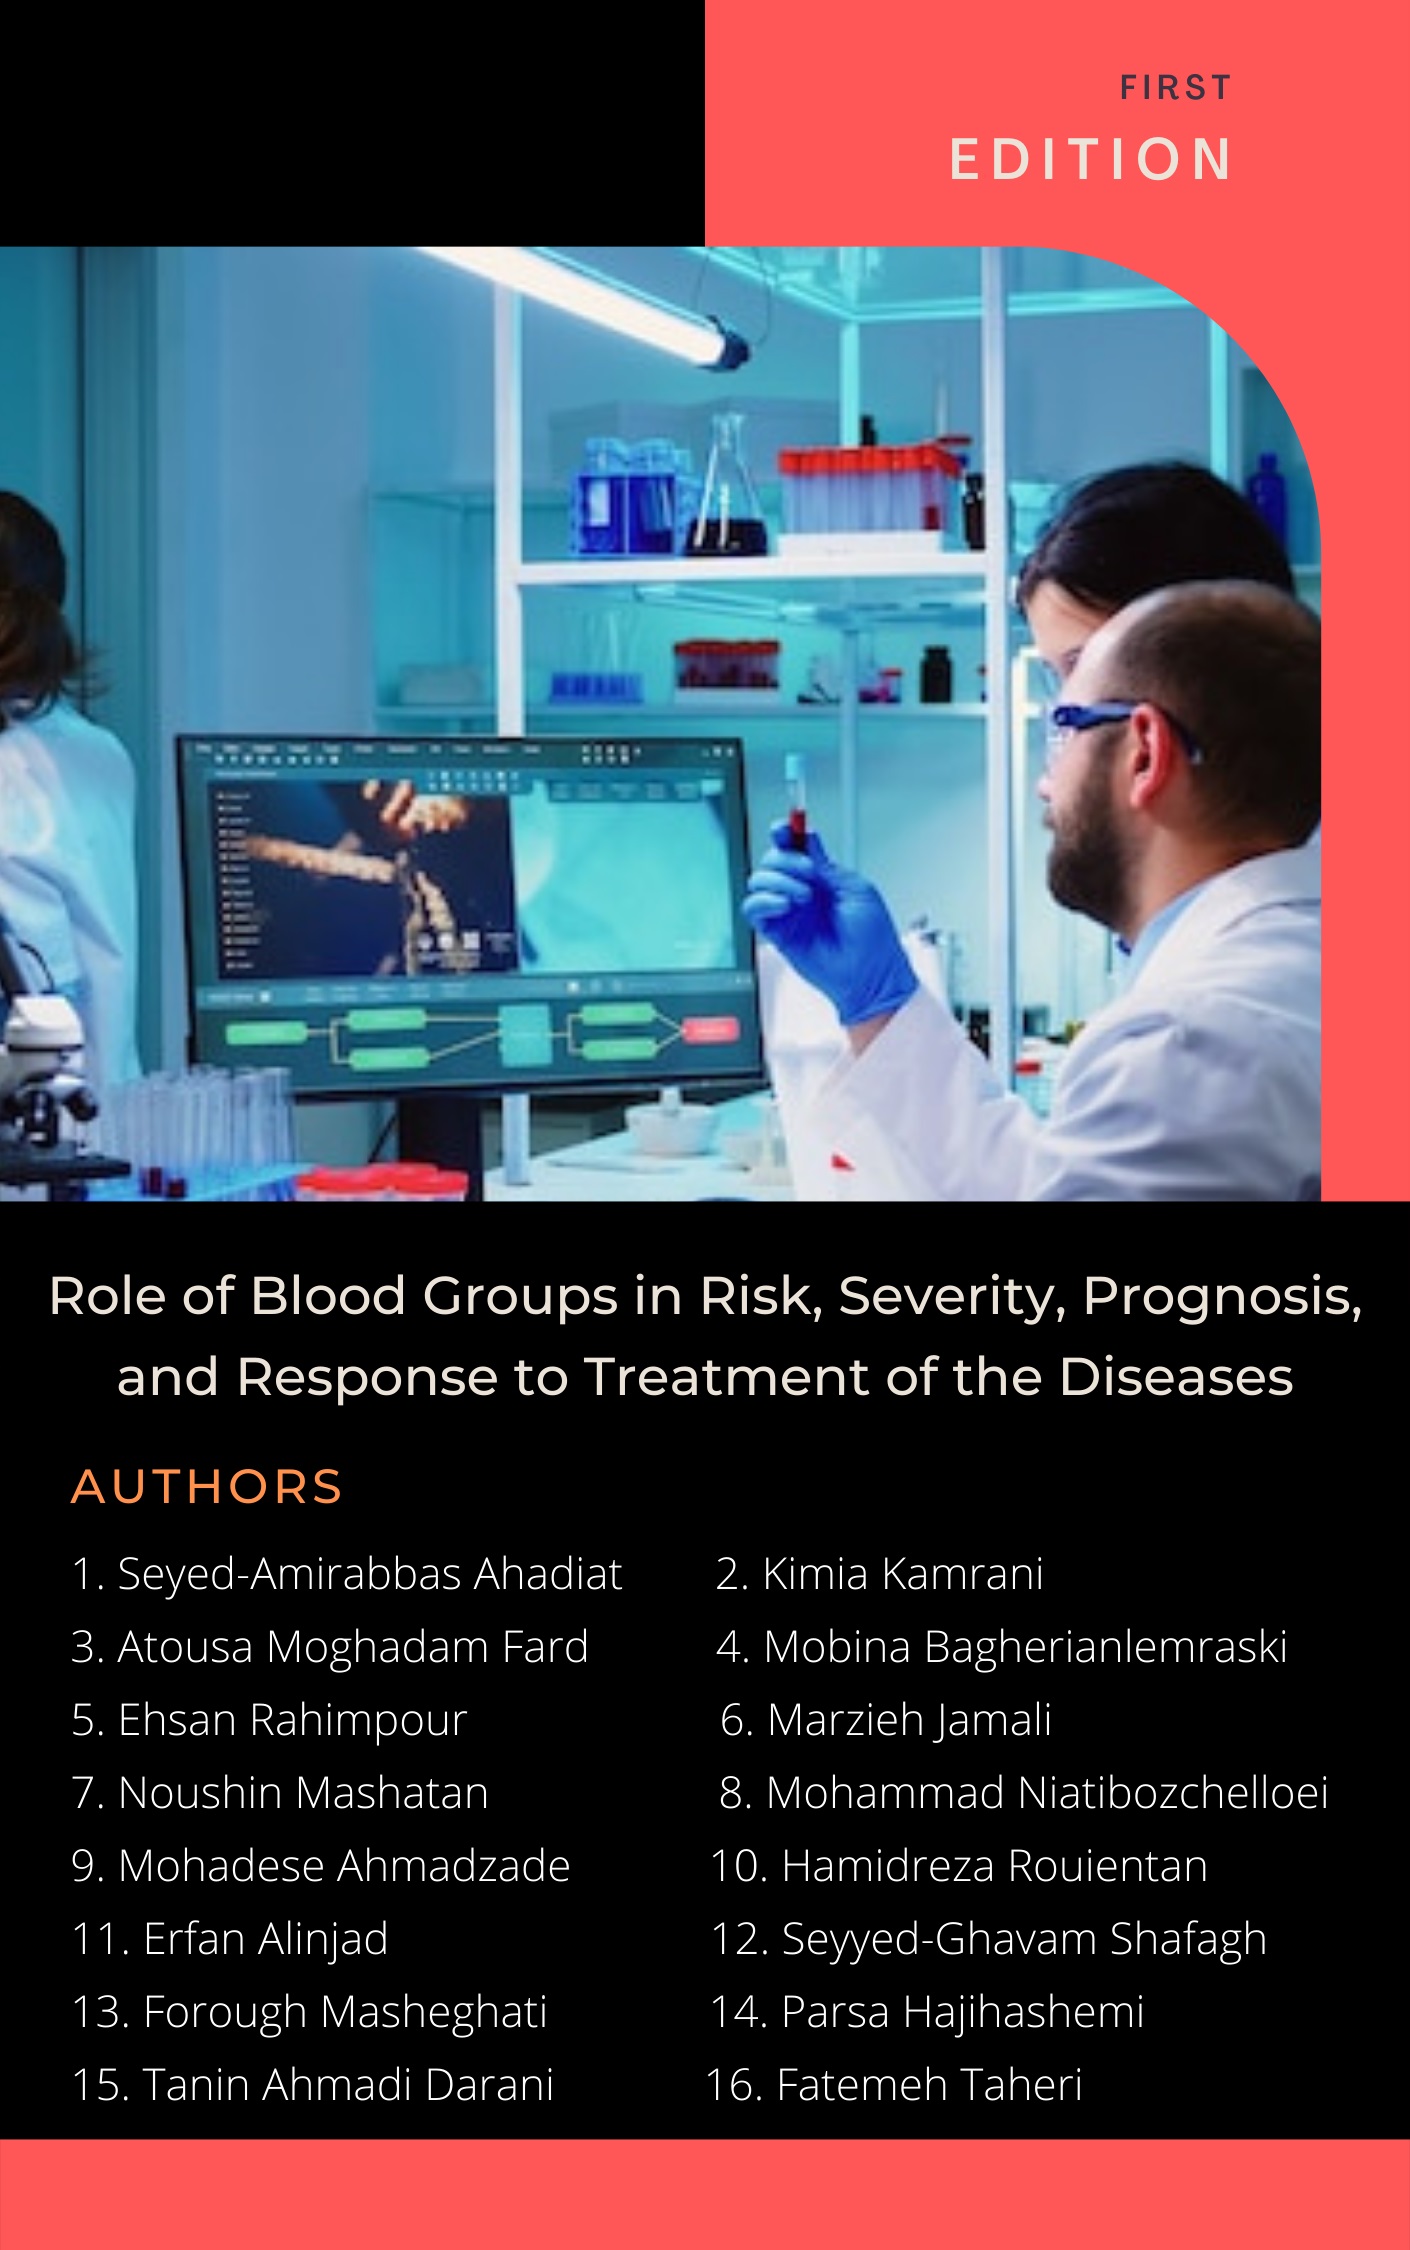 Role of Blood Groups in Risk, Severity, Prognosis, and Response to Treatment of the Diseases 